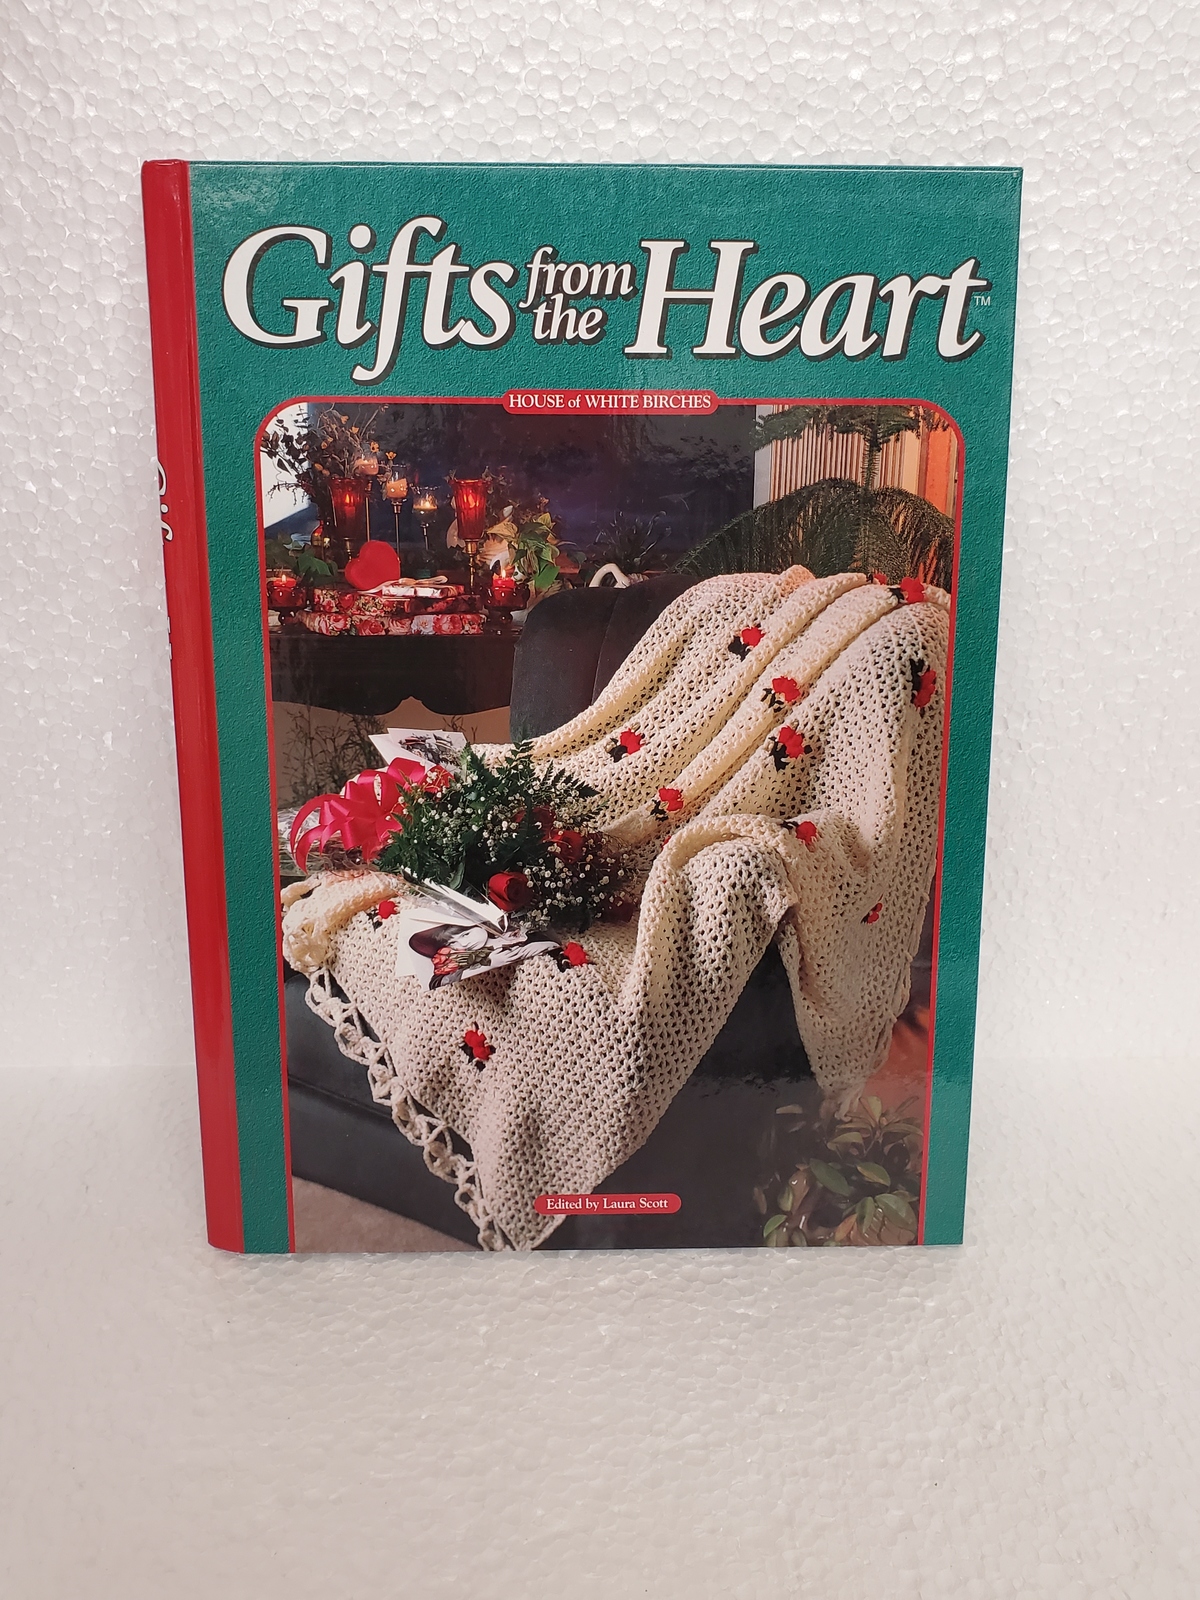 Gifts of the heart crochet book by house of white birches - $10.00